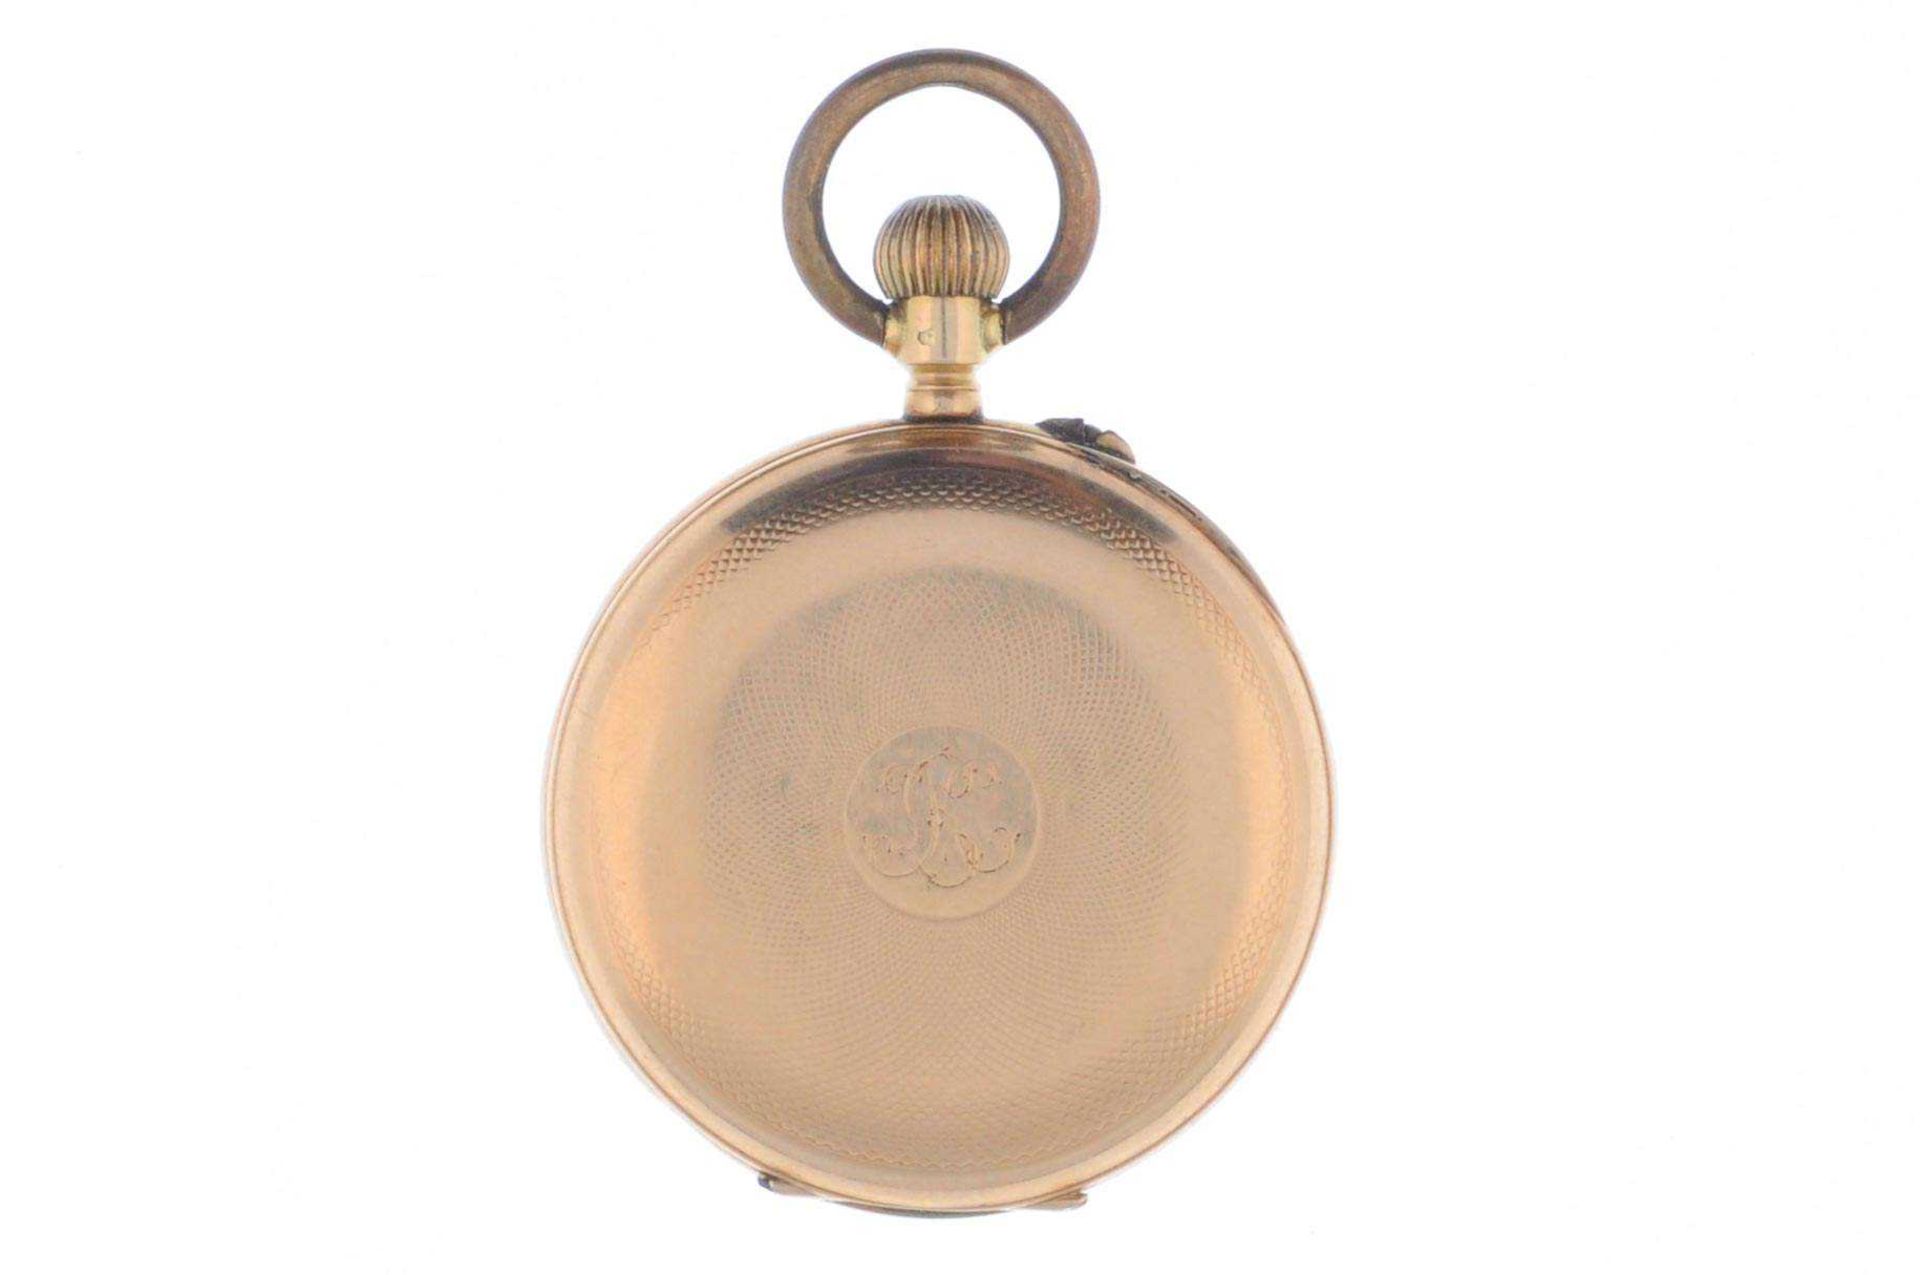 Pocket-watch Kollmar & Jourdan. Ca. 32, 2 mm, about 1880-1890, 585er Gold, gold-painted lever moveme - Image 2 of 5